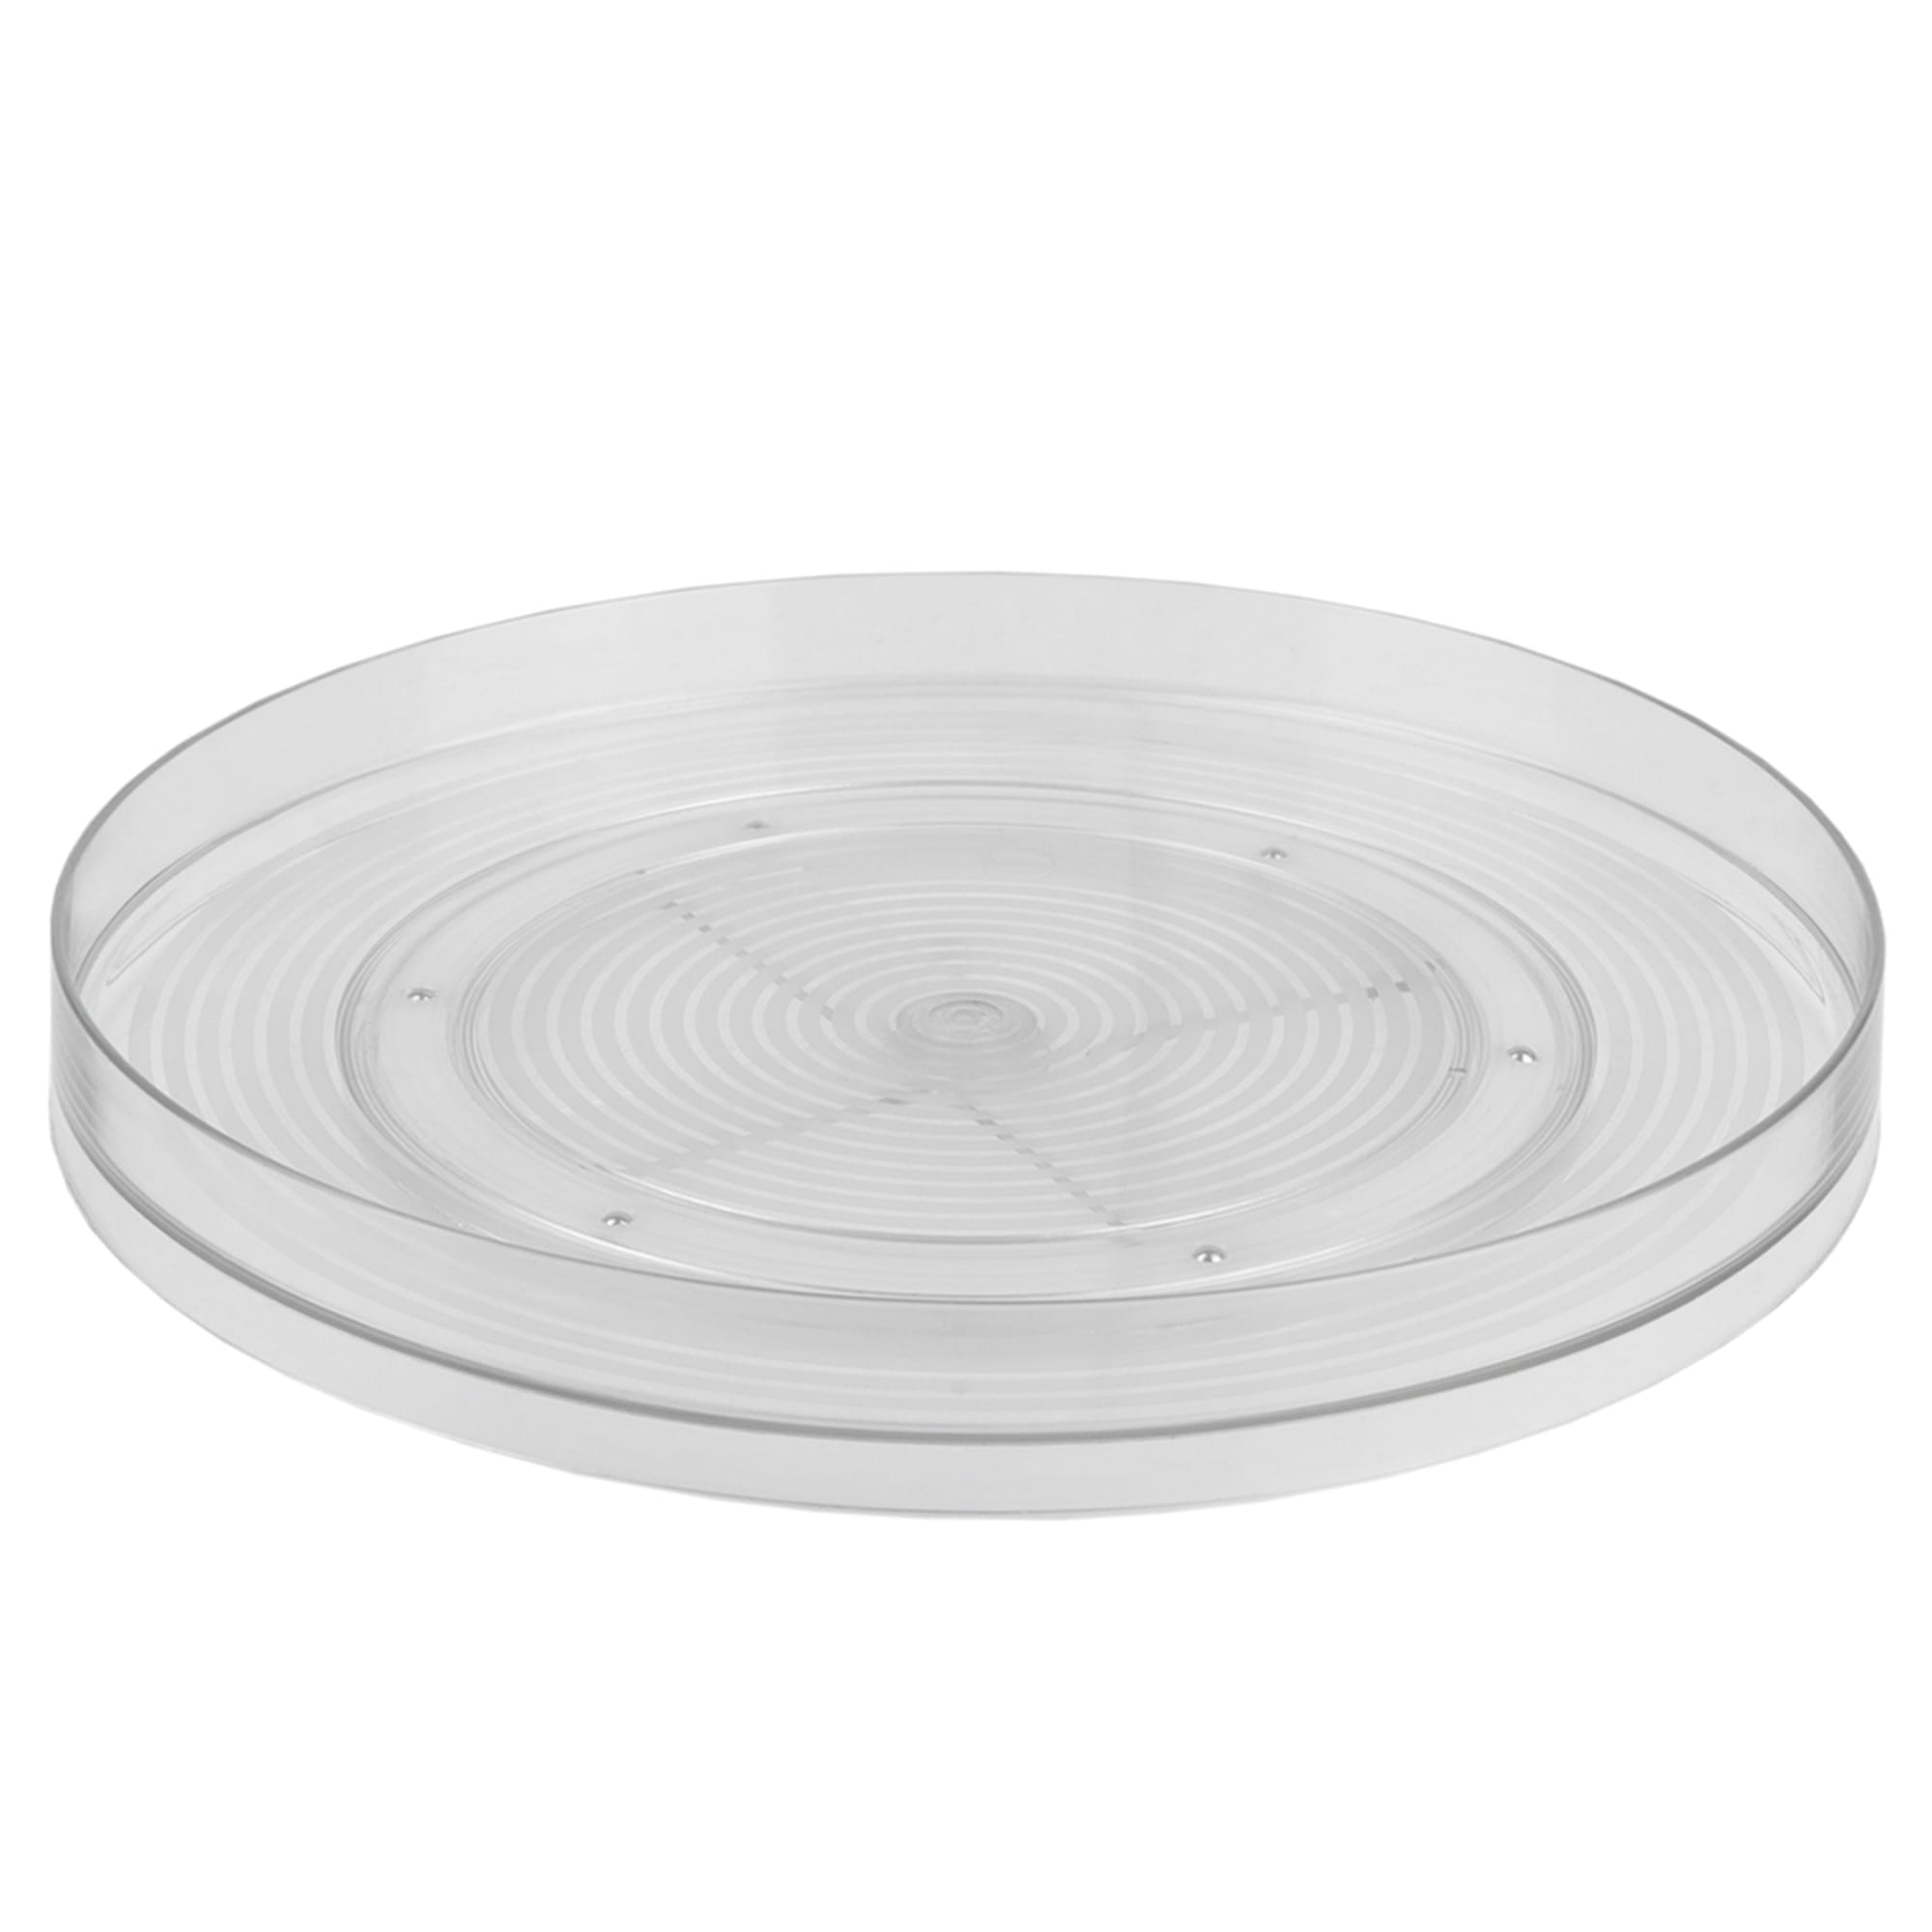 Home Basics Smooth Spin Non-Skid Plastic Lazy Susan, Clear $4.00 EACH, CASE PACK OF 12